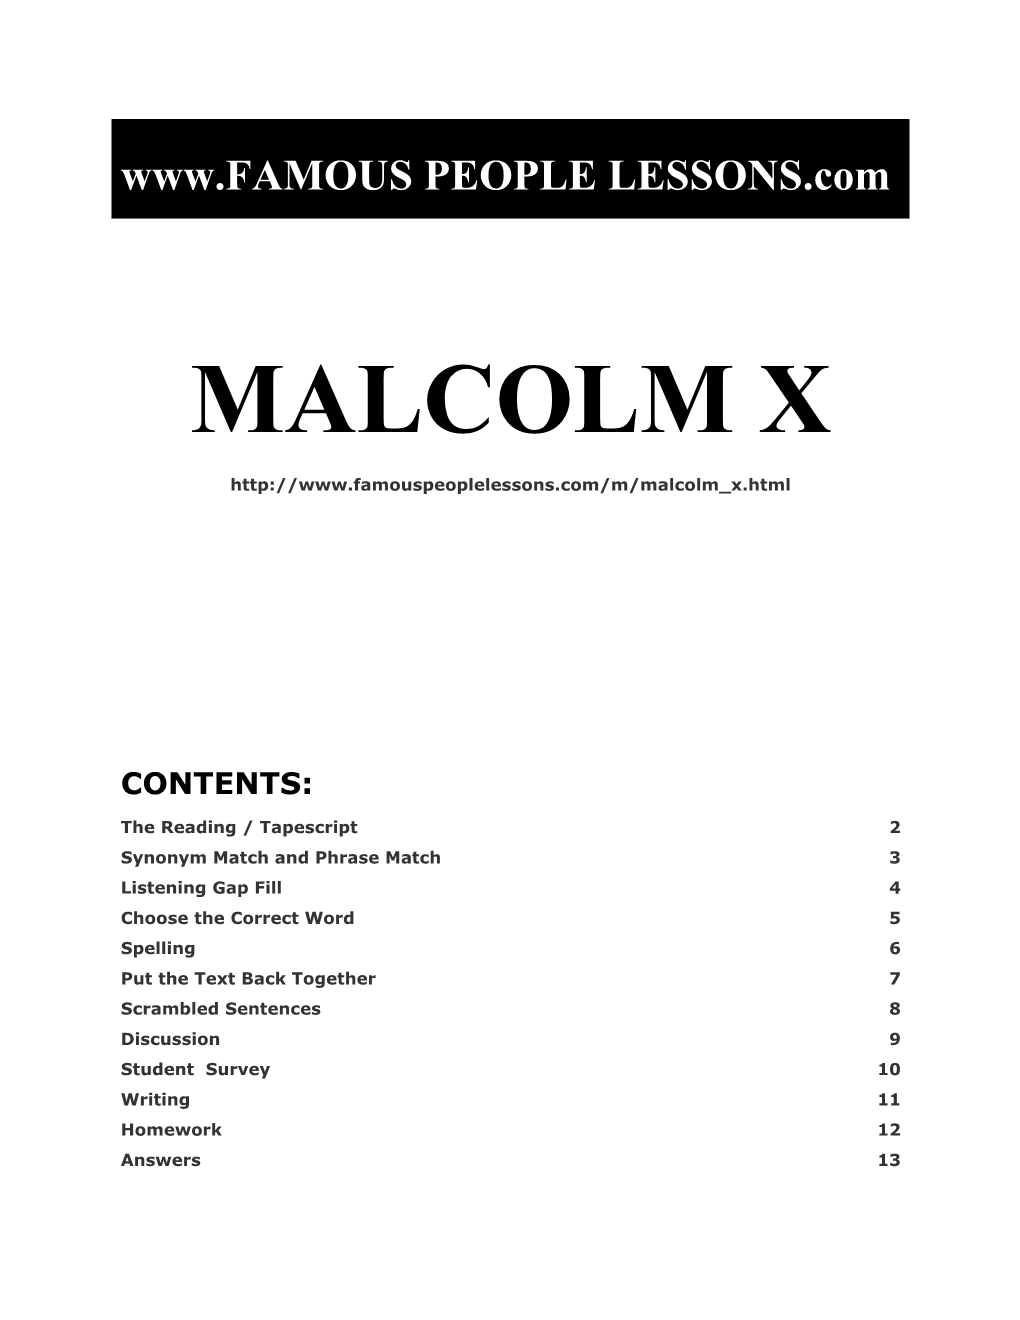 Famous People Lessons - Malcolm X